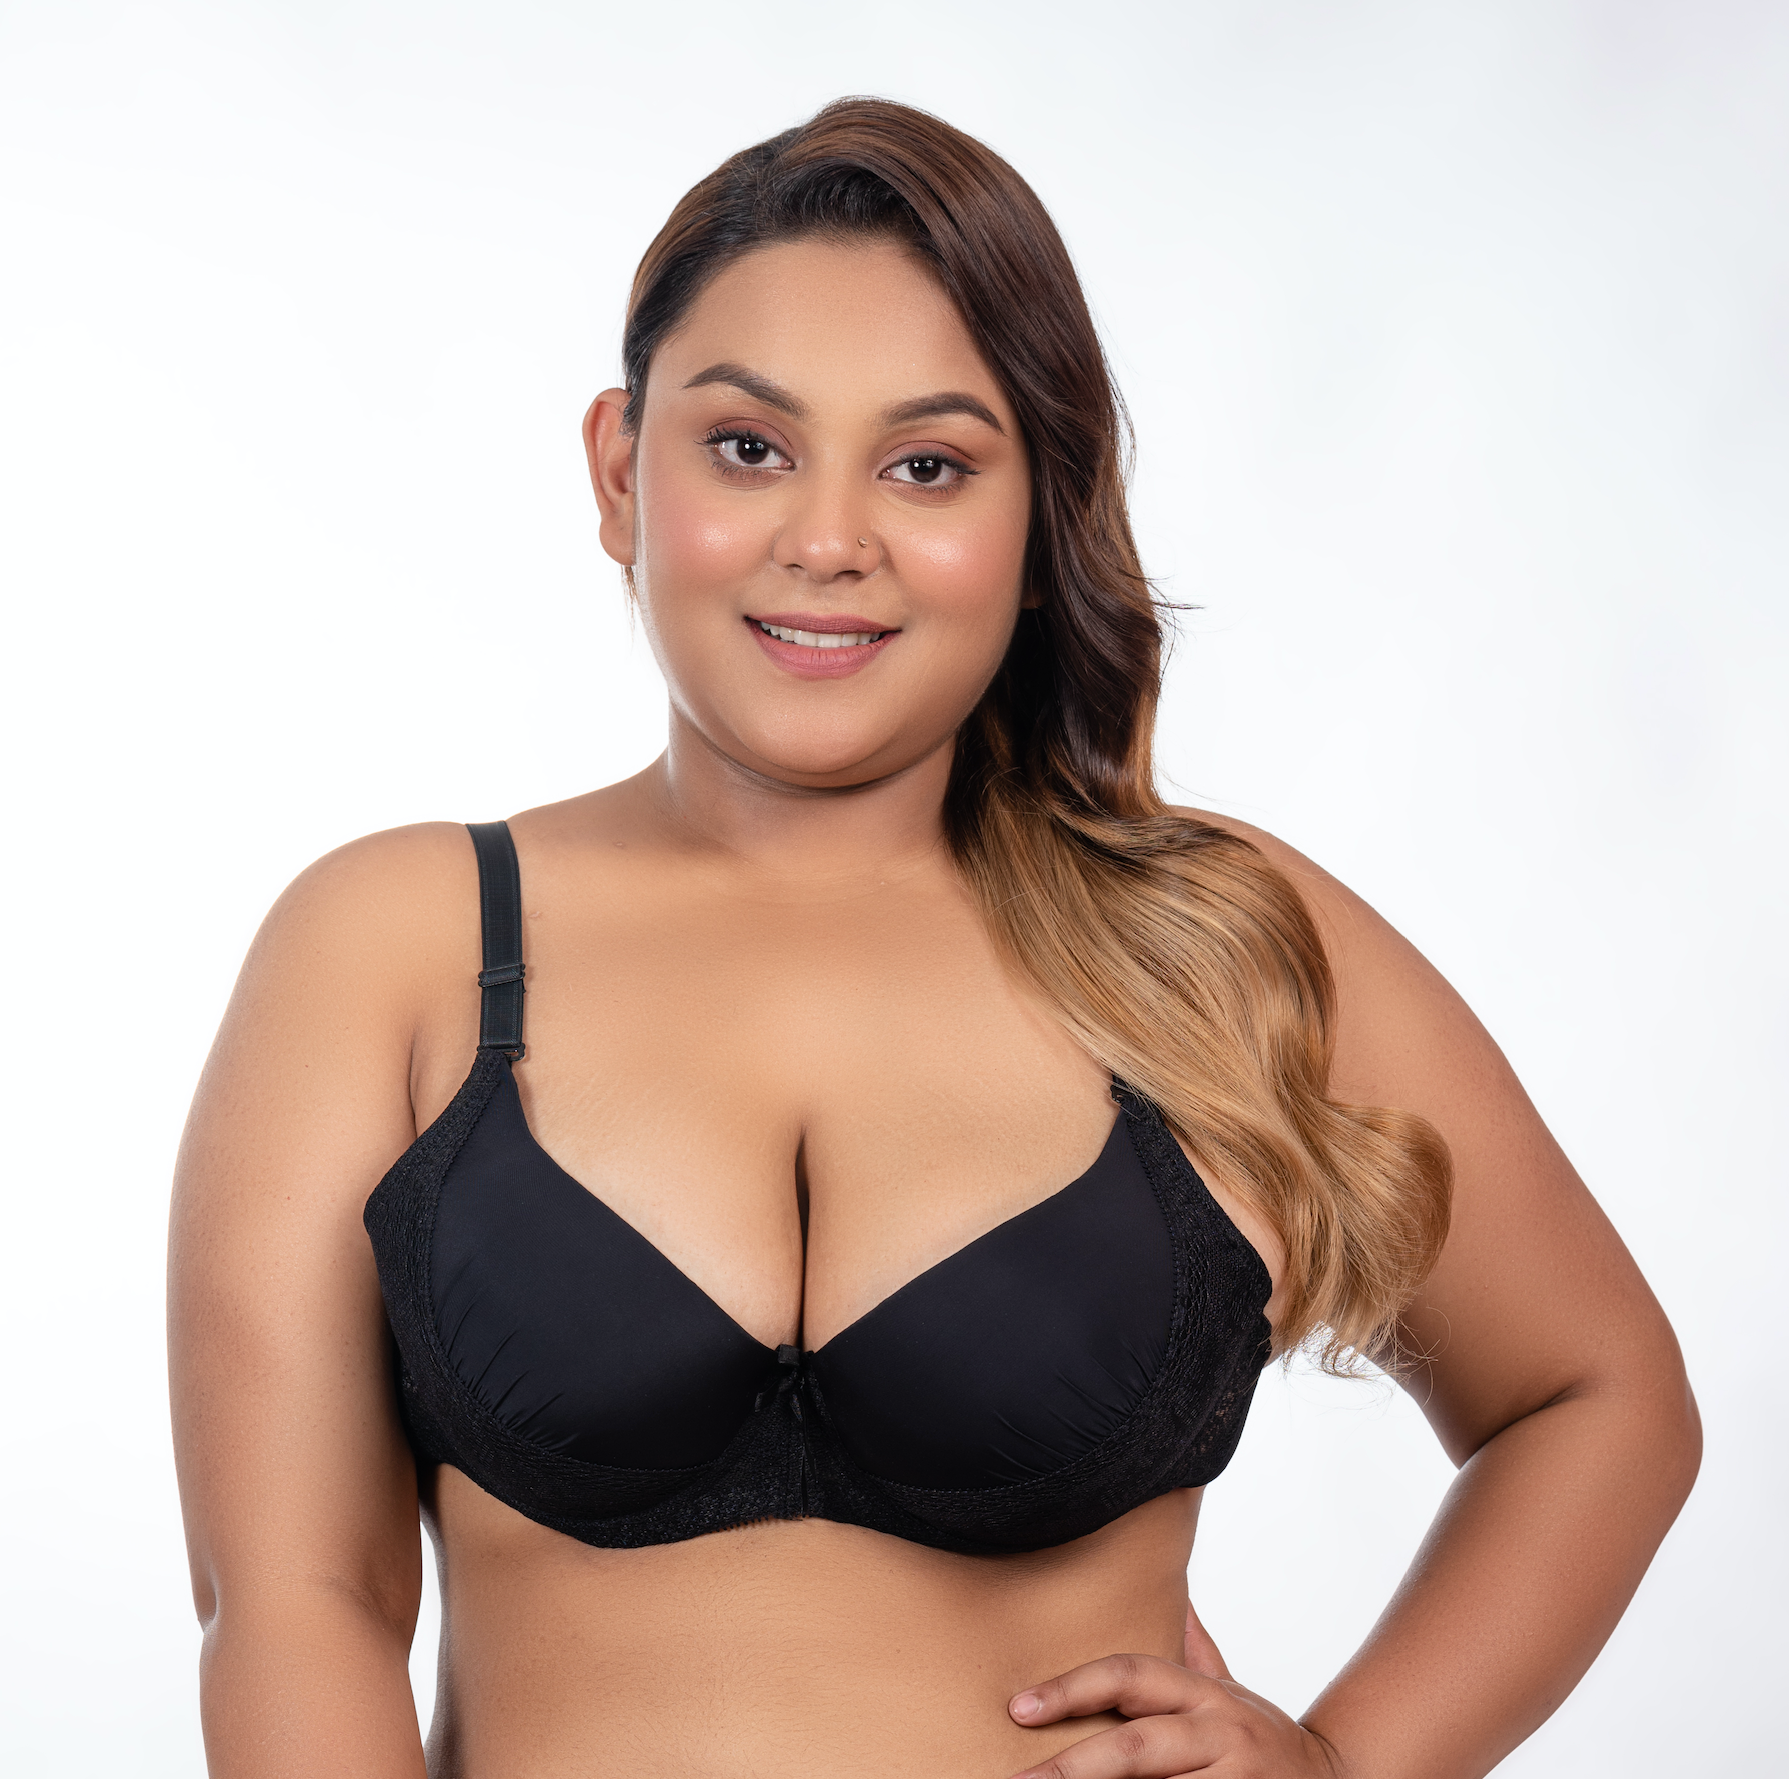 Traditional Non-Padded Bra 2 Pack